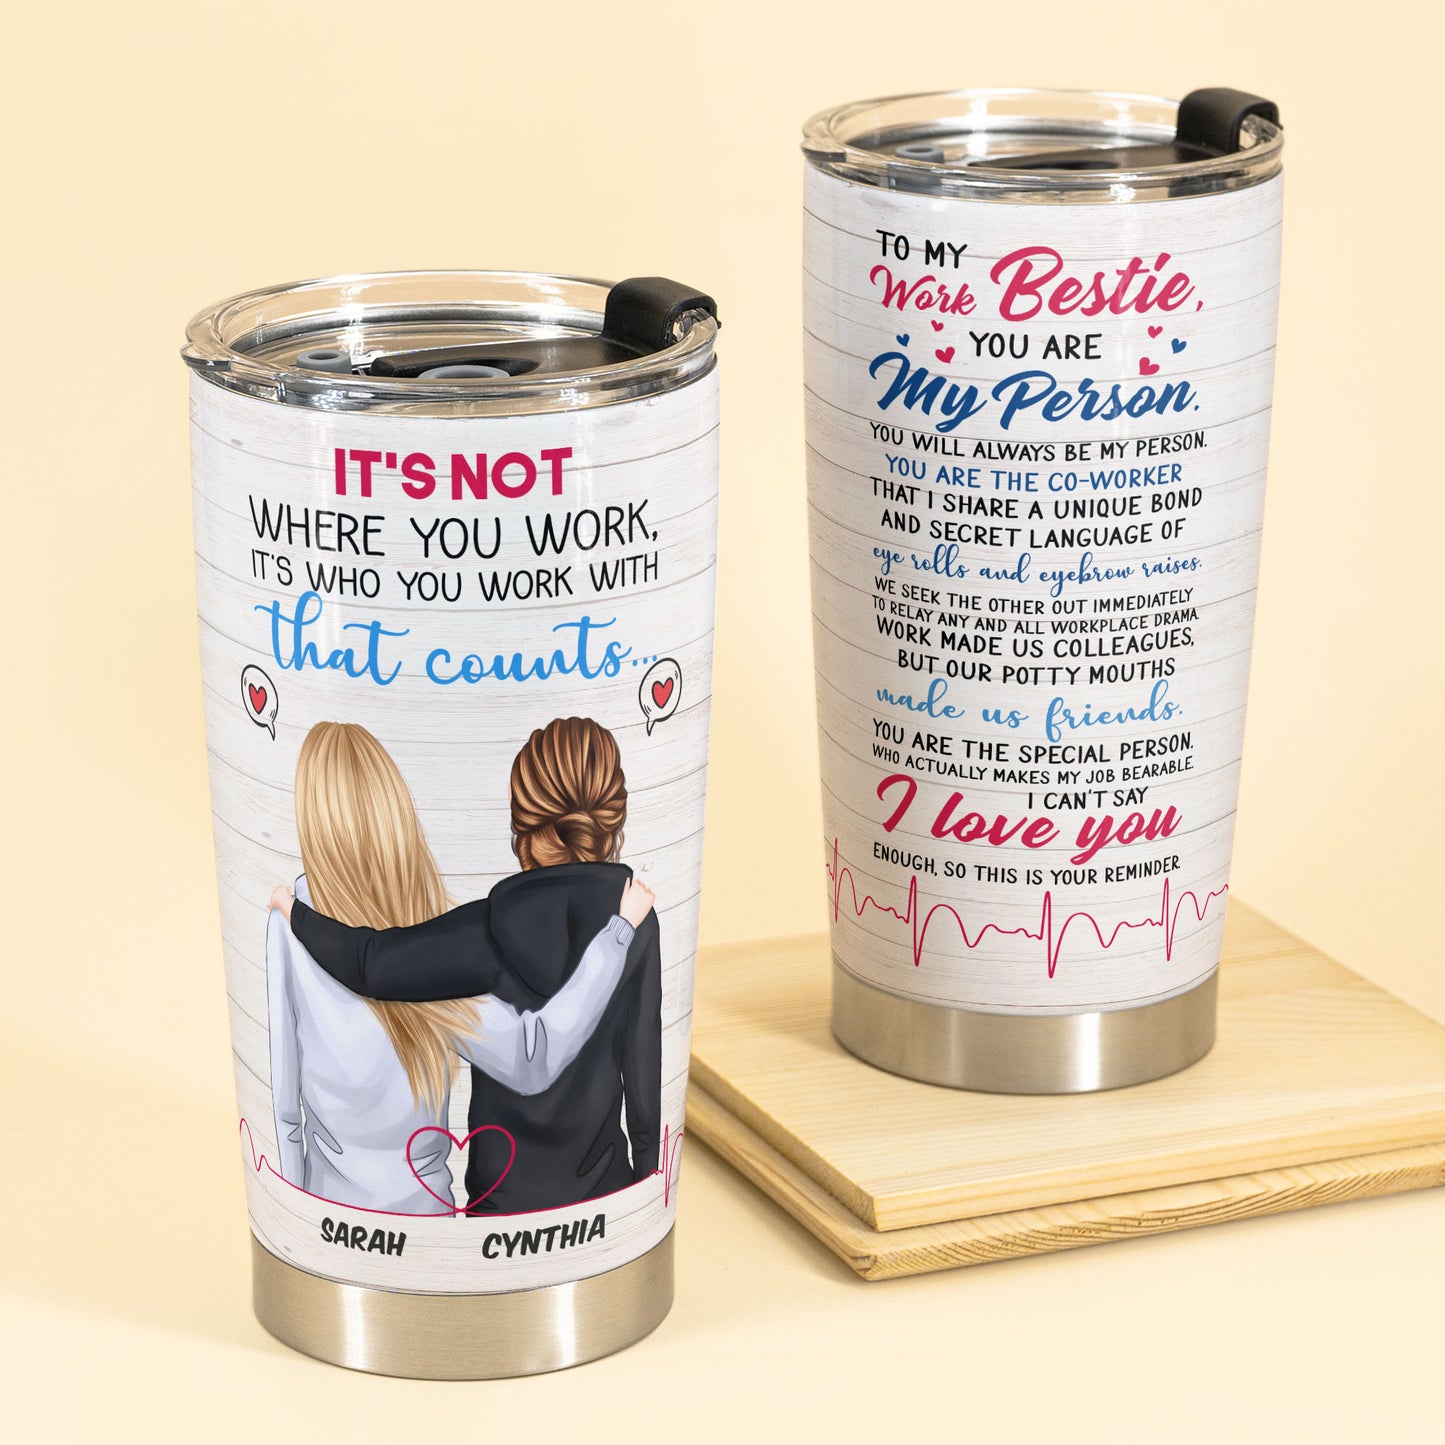 Work Bestie Our Potty Mouths Made Us Friends, Friends, Co-workers Custom Skinny Tumbler, Gift For Work Besties, Colleagues, Friends, Best Friends-Macorner